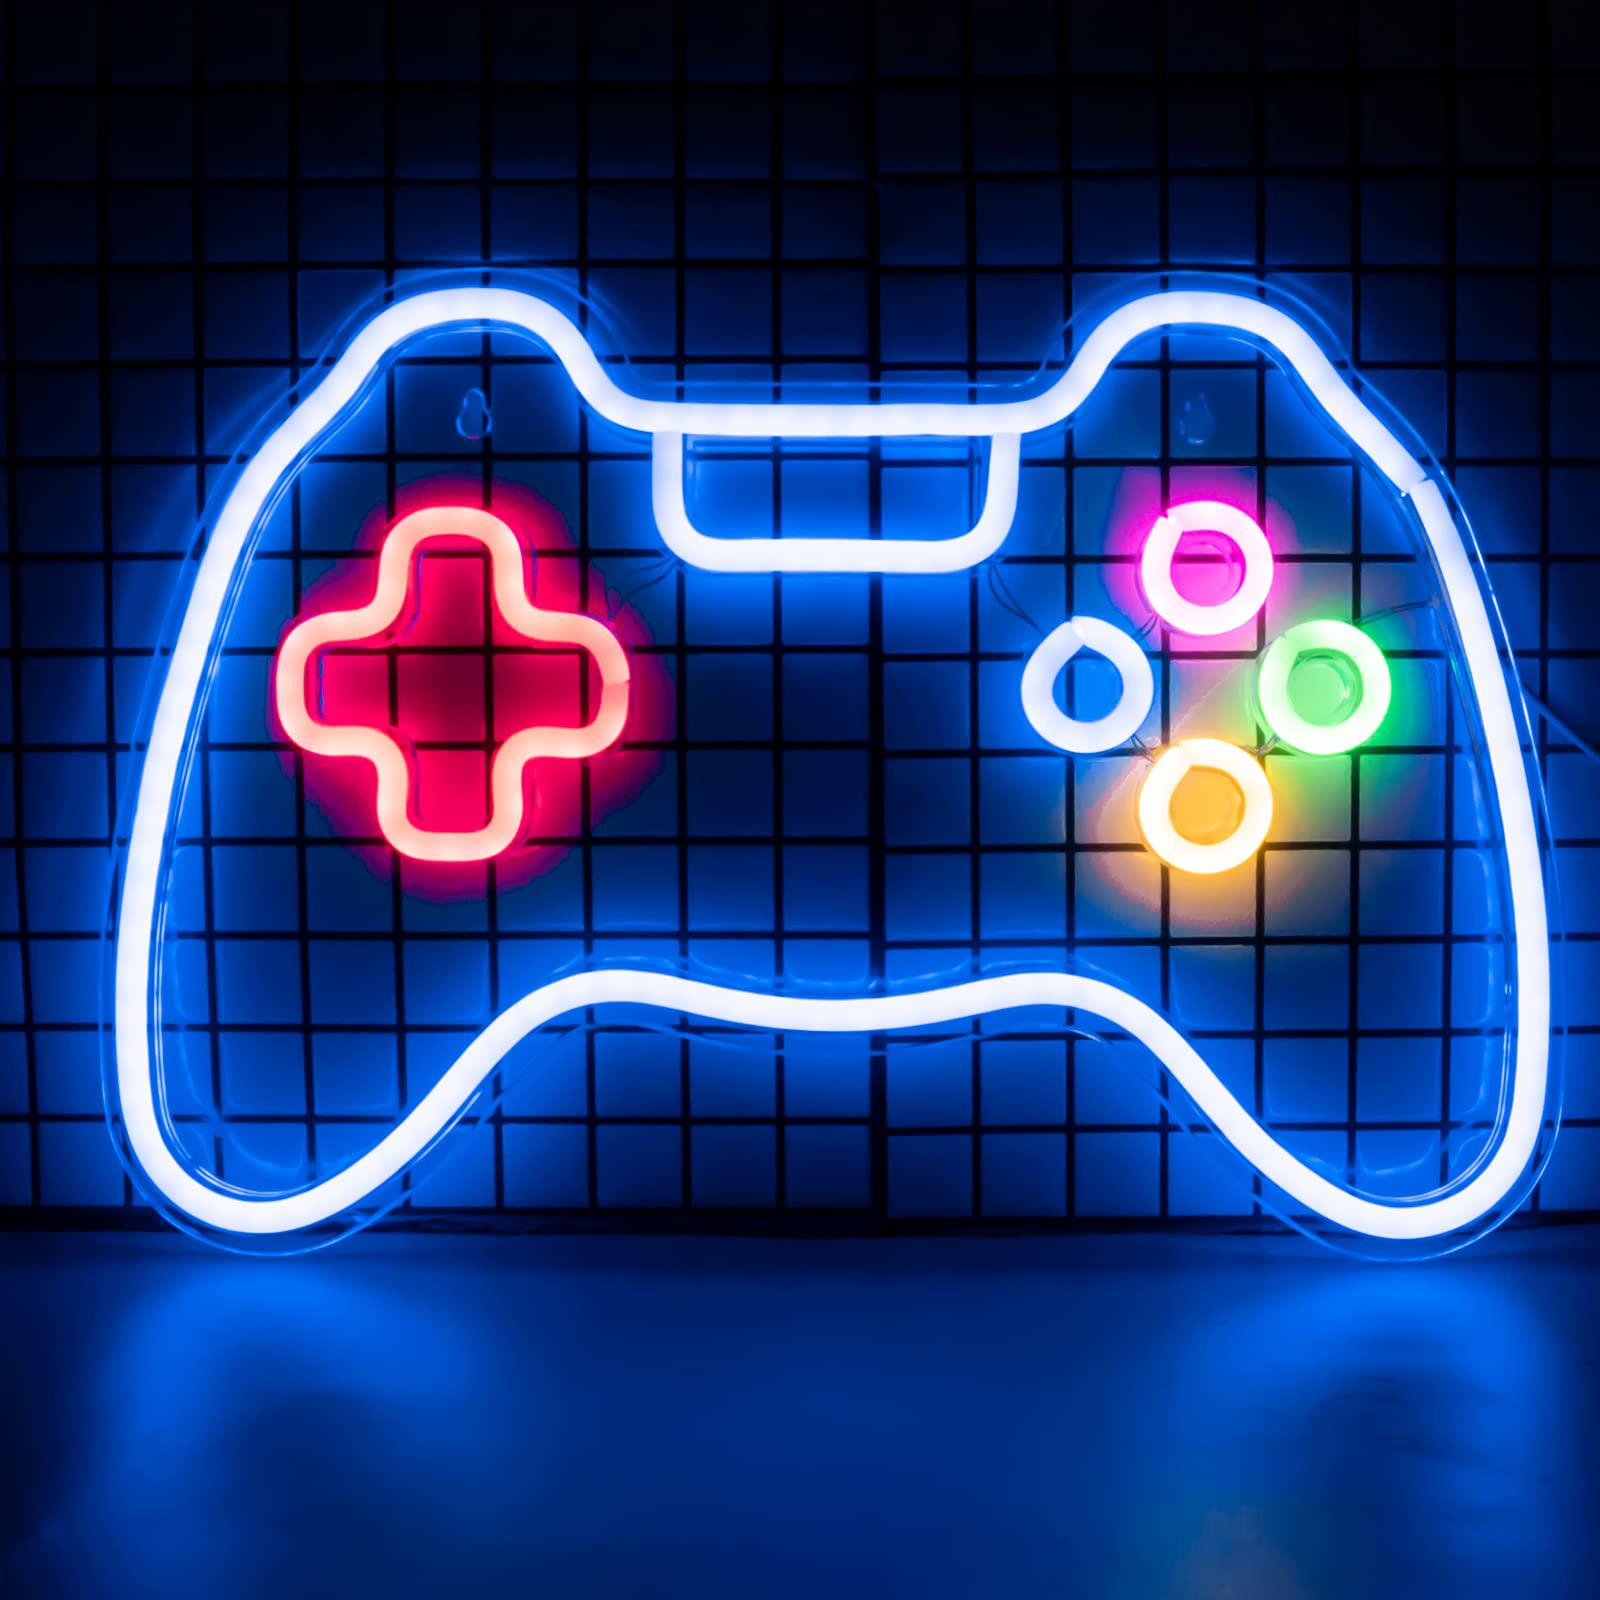 Zcitek Gaming Neon Sign, Gamer Neon Sign for Game Room Decor, USB Powered Switch Gaming Led Signs for Teen Boy Gaming Room Wall Decor, 